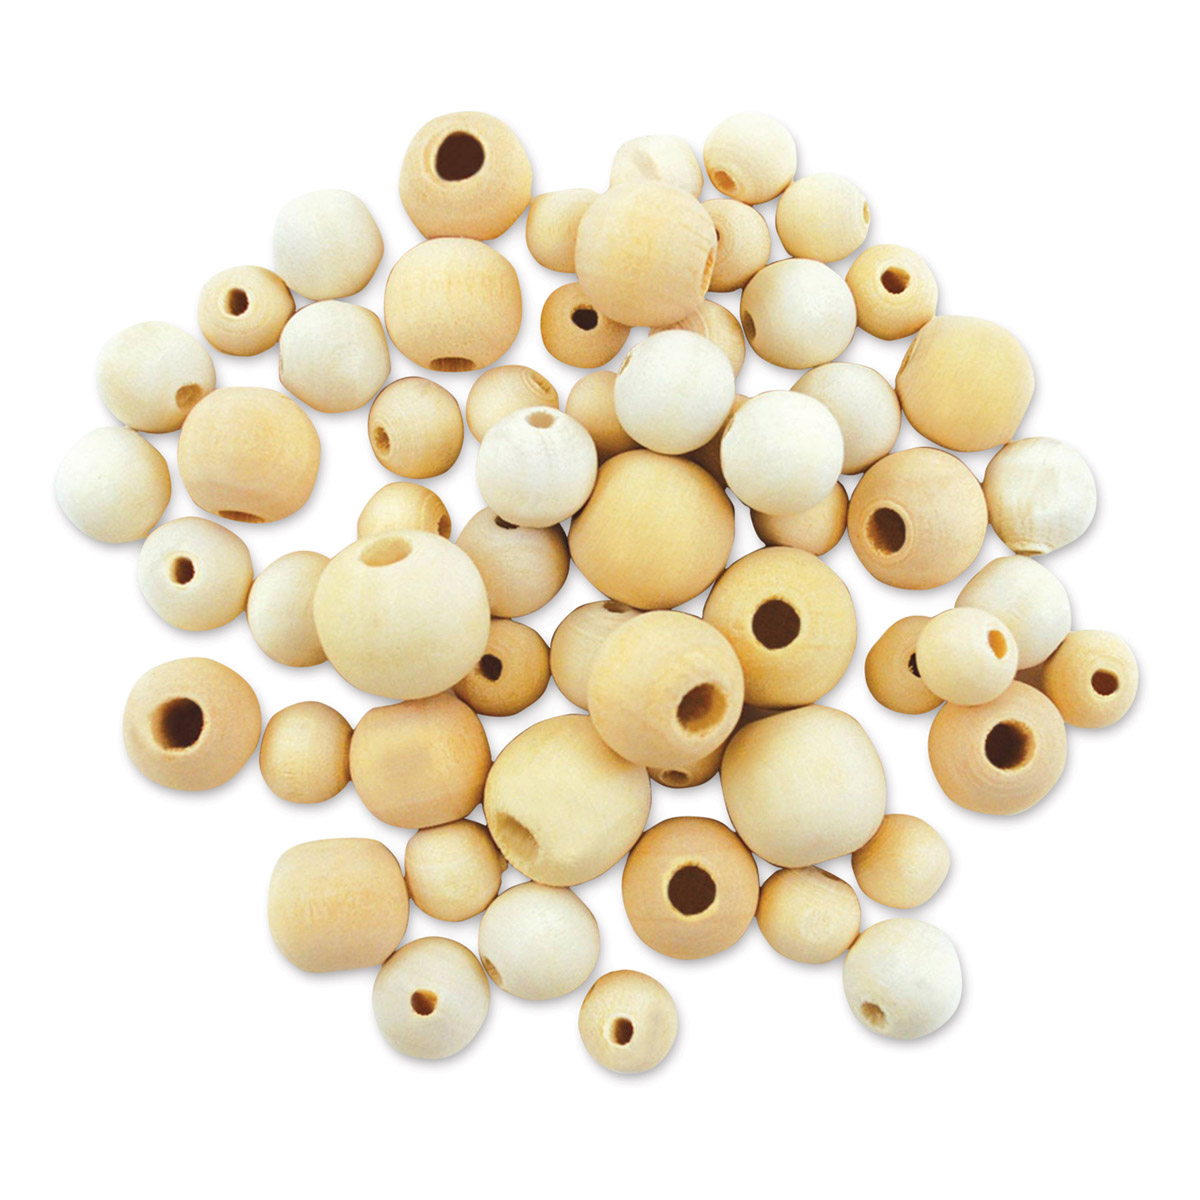 Krafty Kids Wood Beads - Round, Unfinished, Package of 60 | BLICK Art ...